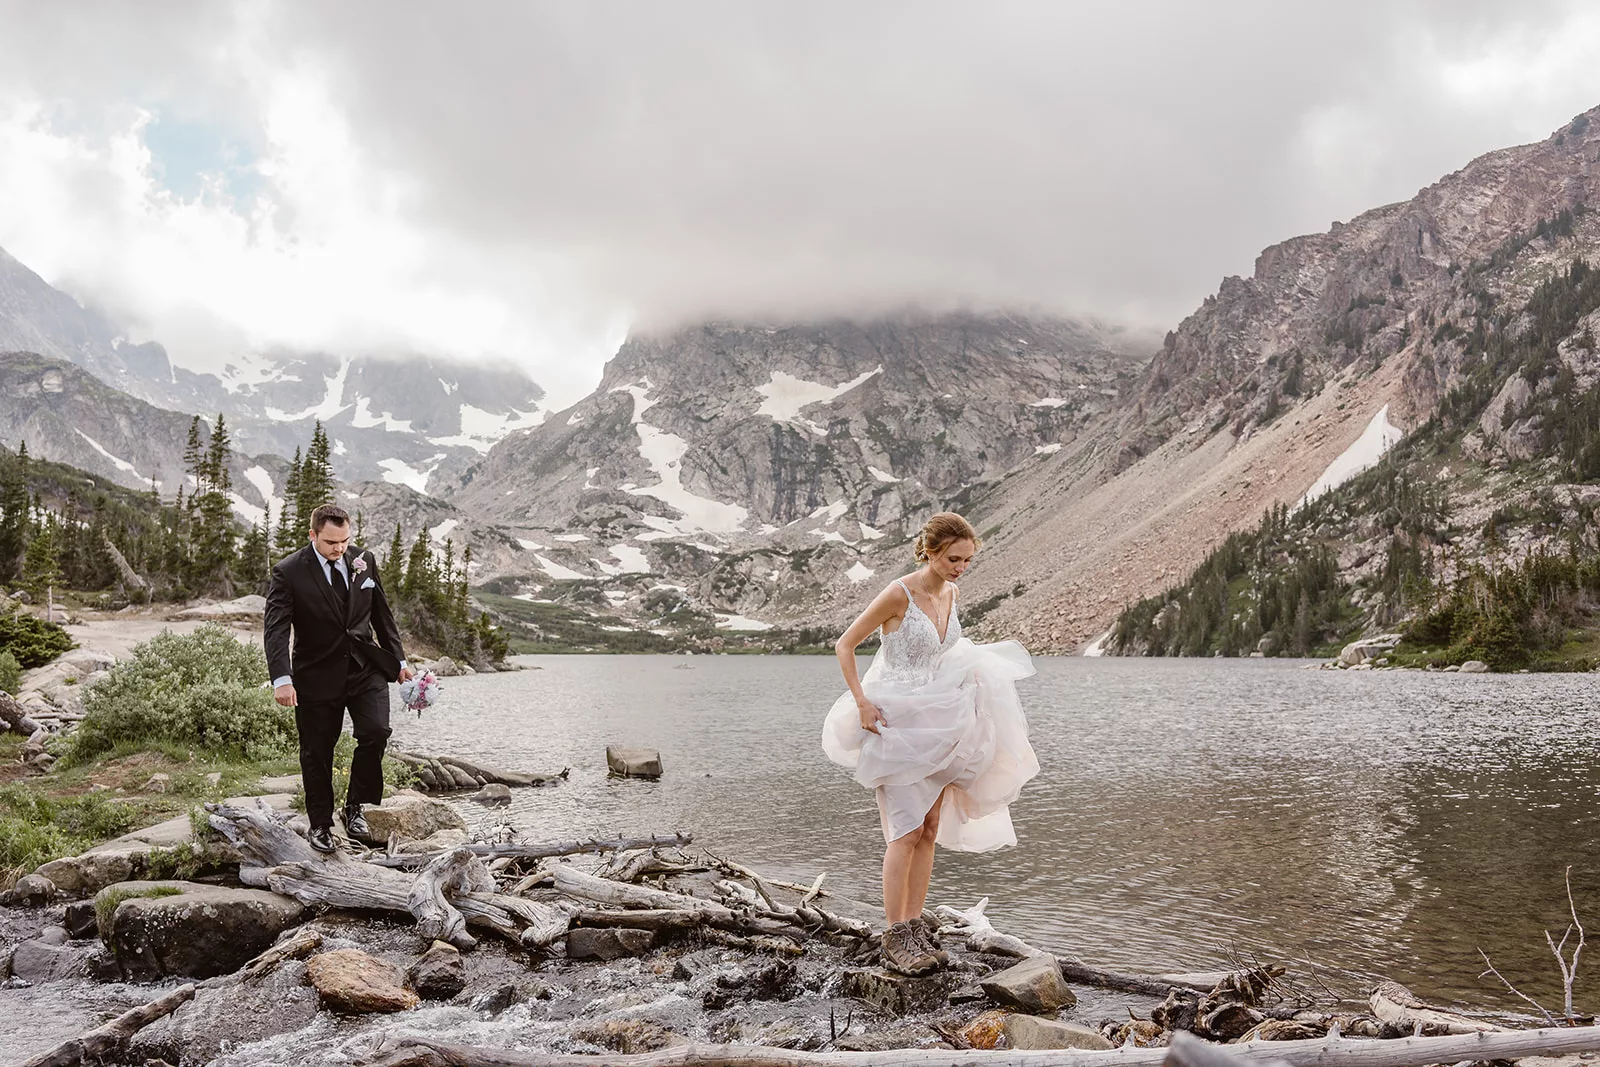 A couple hikes to their elopement ceremony spot for their private wedding in the Colorado mountains.